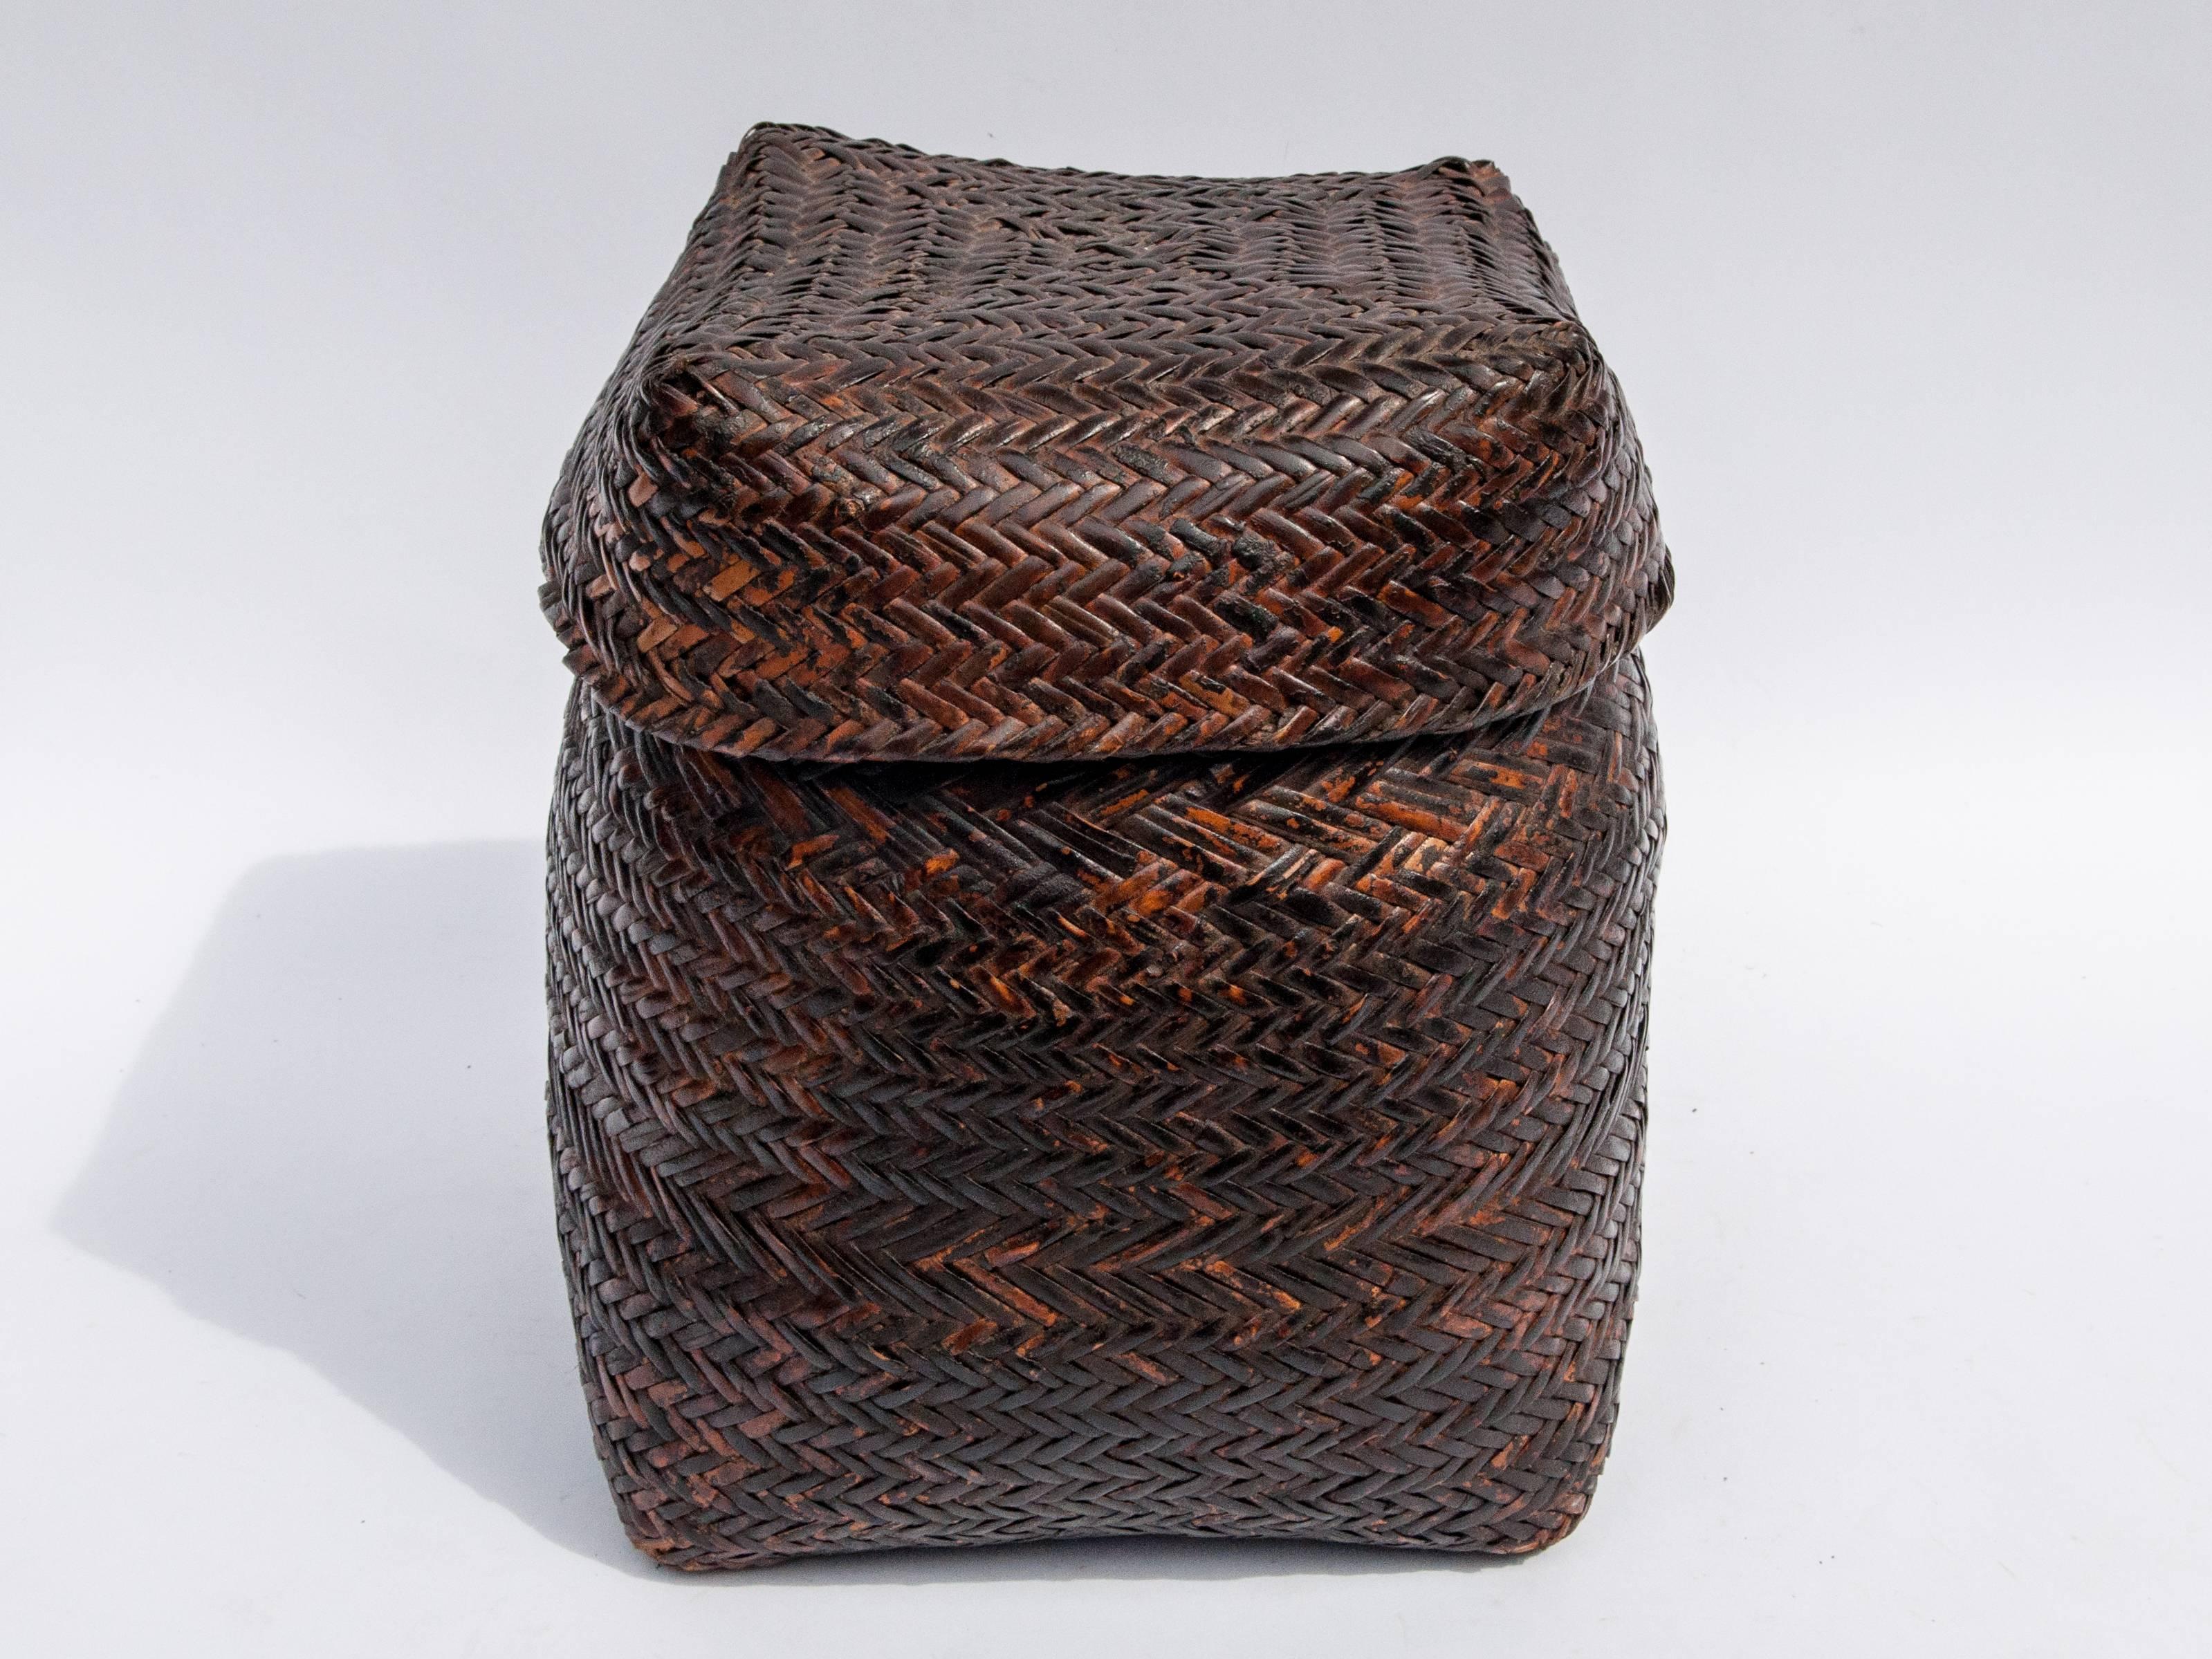 Rustic Tribal Storage Basket with Lid from the Tamang of Nepal, Mid-20th Century 2